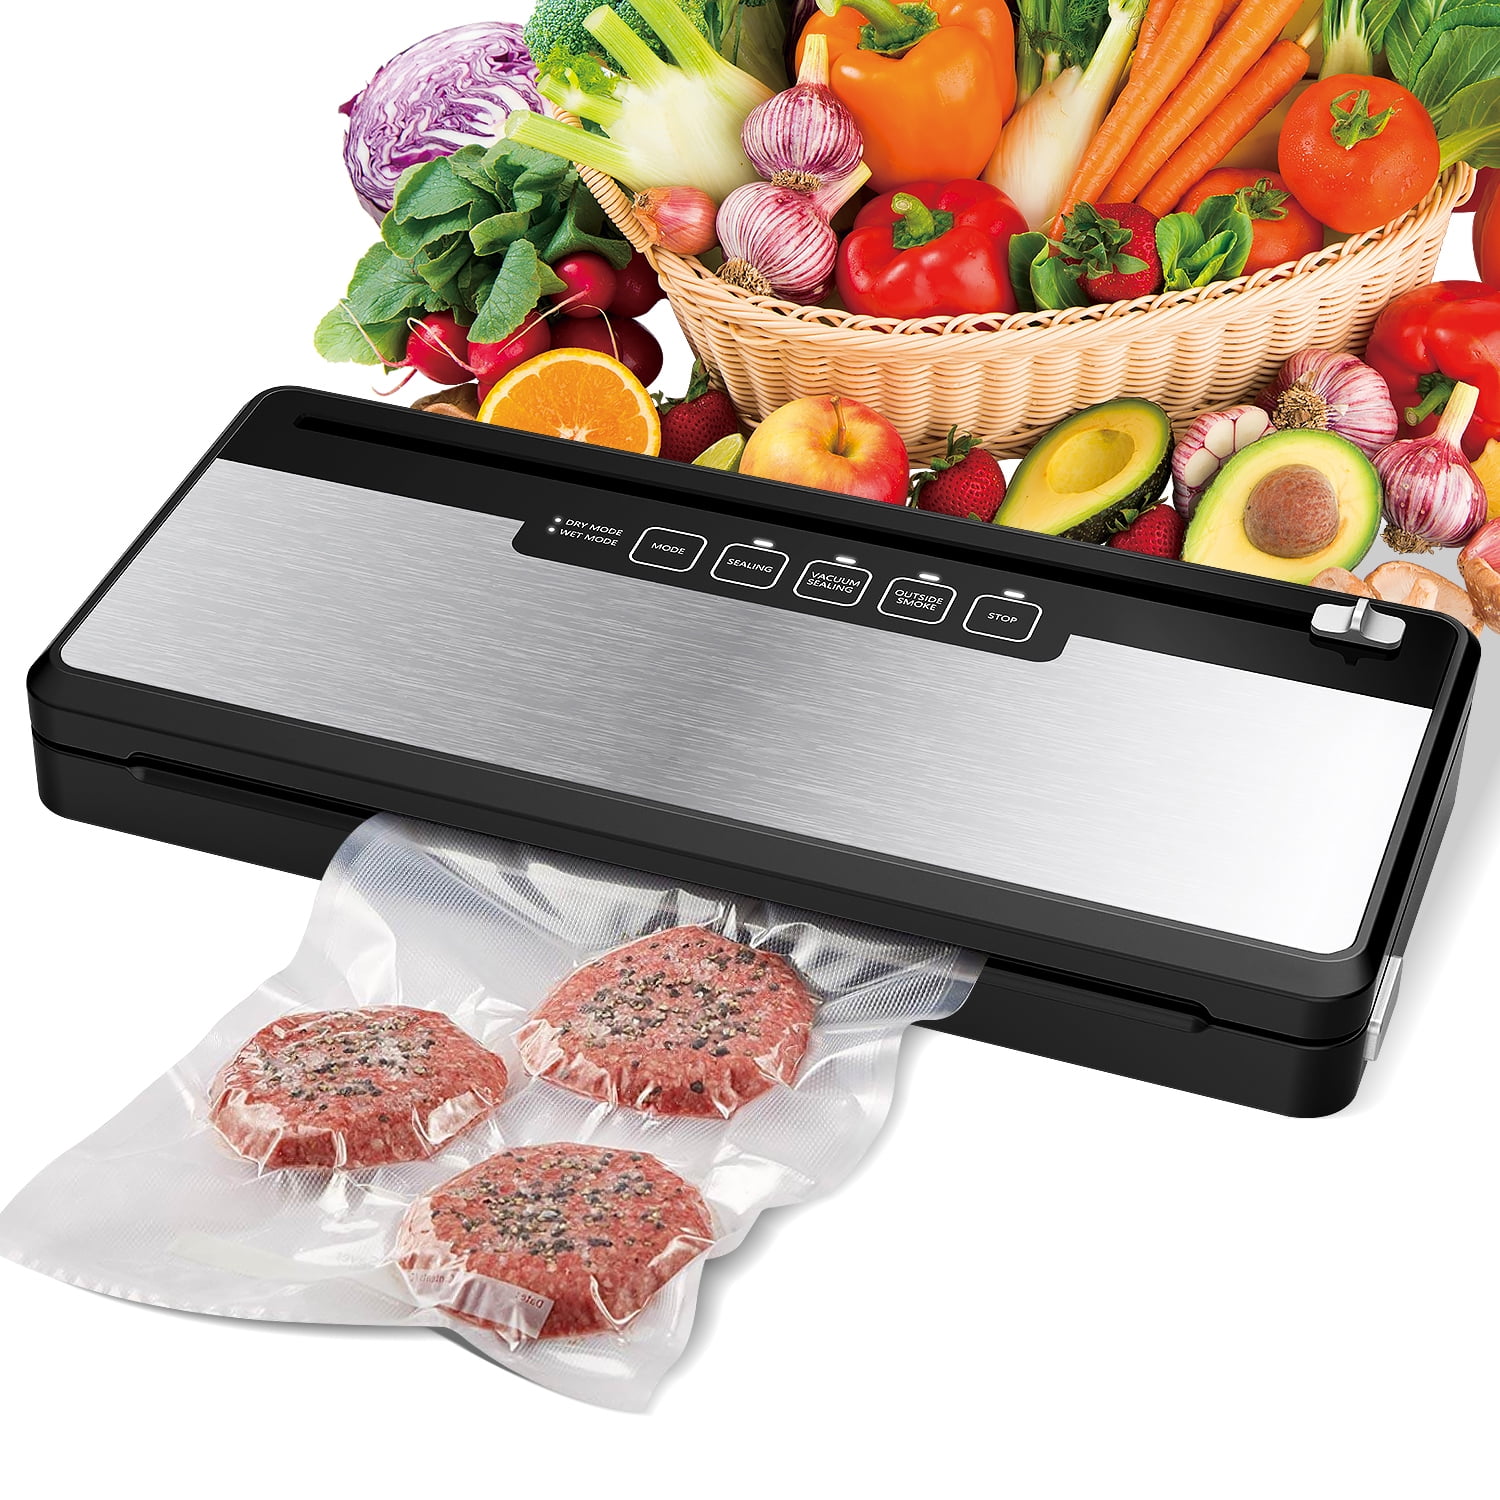 Vacuum Sealer Machine, KOIOS Automatic Food Sealer with Cutter, Dry & Moist  Modes, Compact Design Powerful Suction Air Sealing System with 10 Sealing